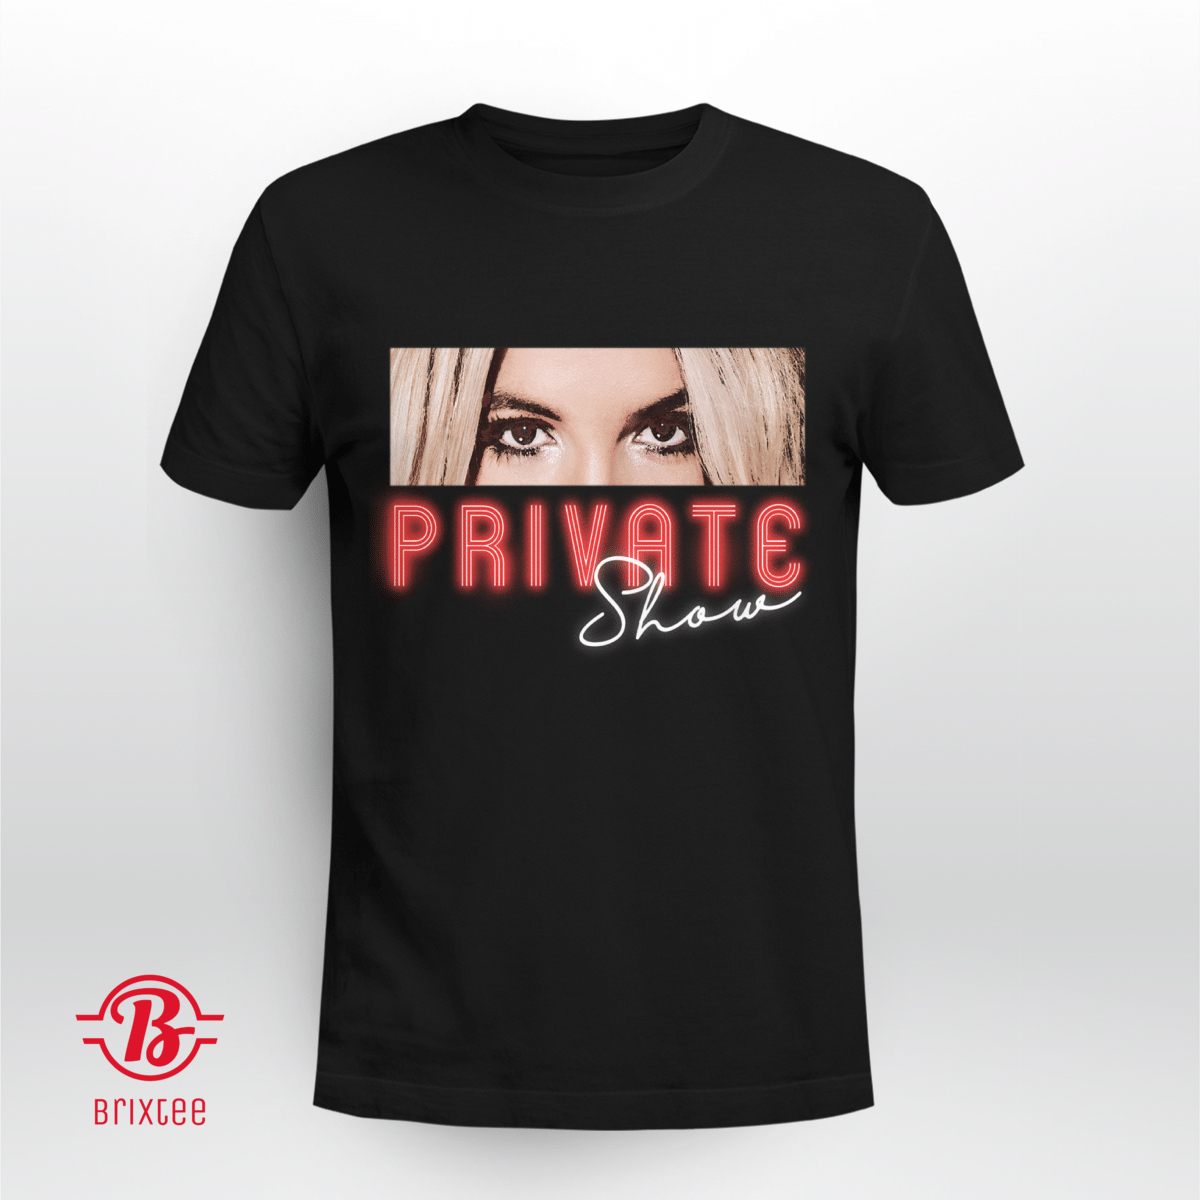 Britney Spears - Private Show